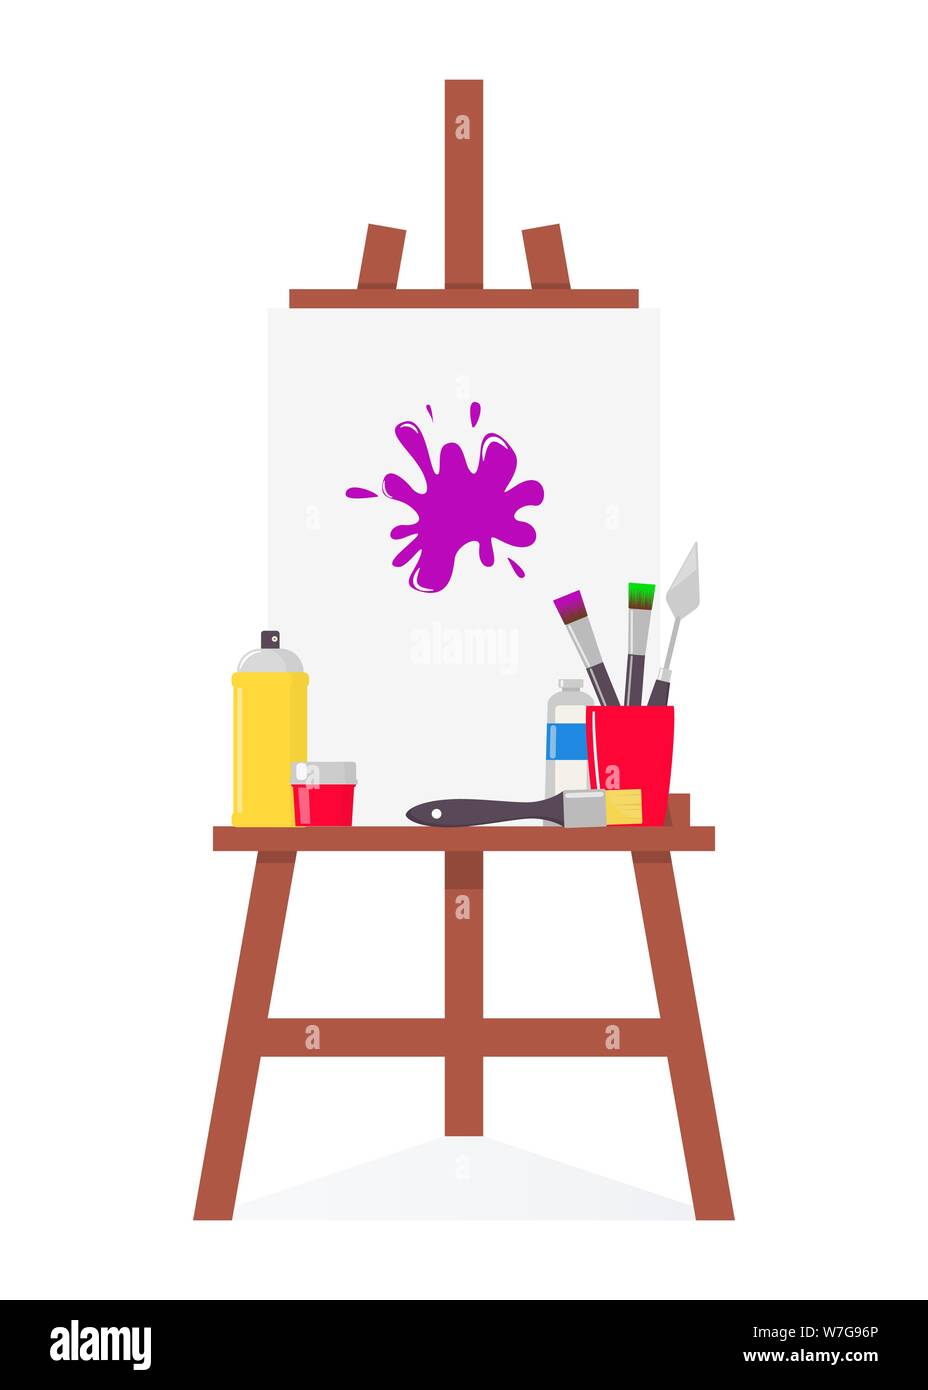 https://c8.alamy.com/comp/W7G96P/painting-tools-elements-in-flat-style-set-art-supplies-easel-with-canvas-paint-tubes-palette-knife-brushes-vector-illustration-W7G96P.jpg